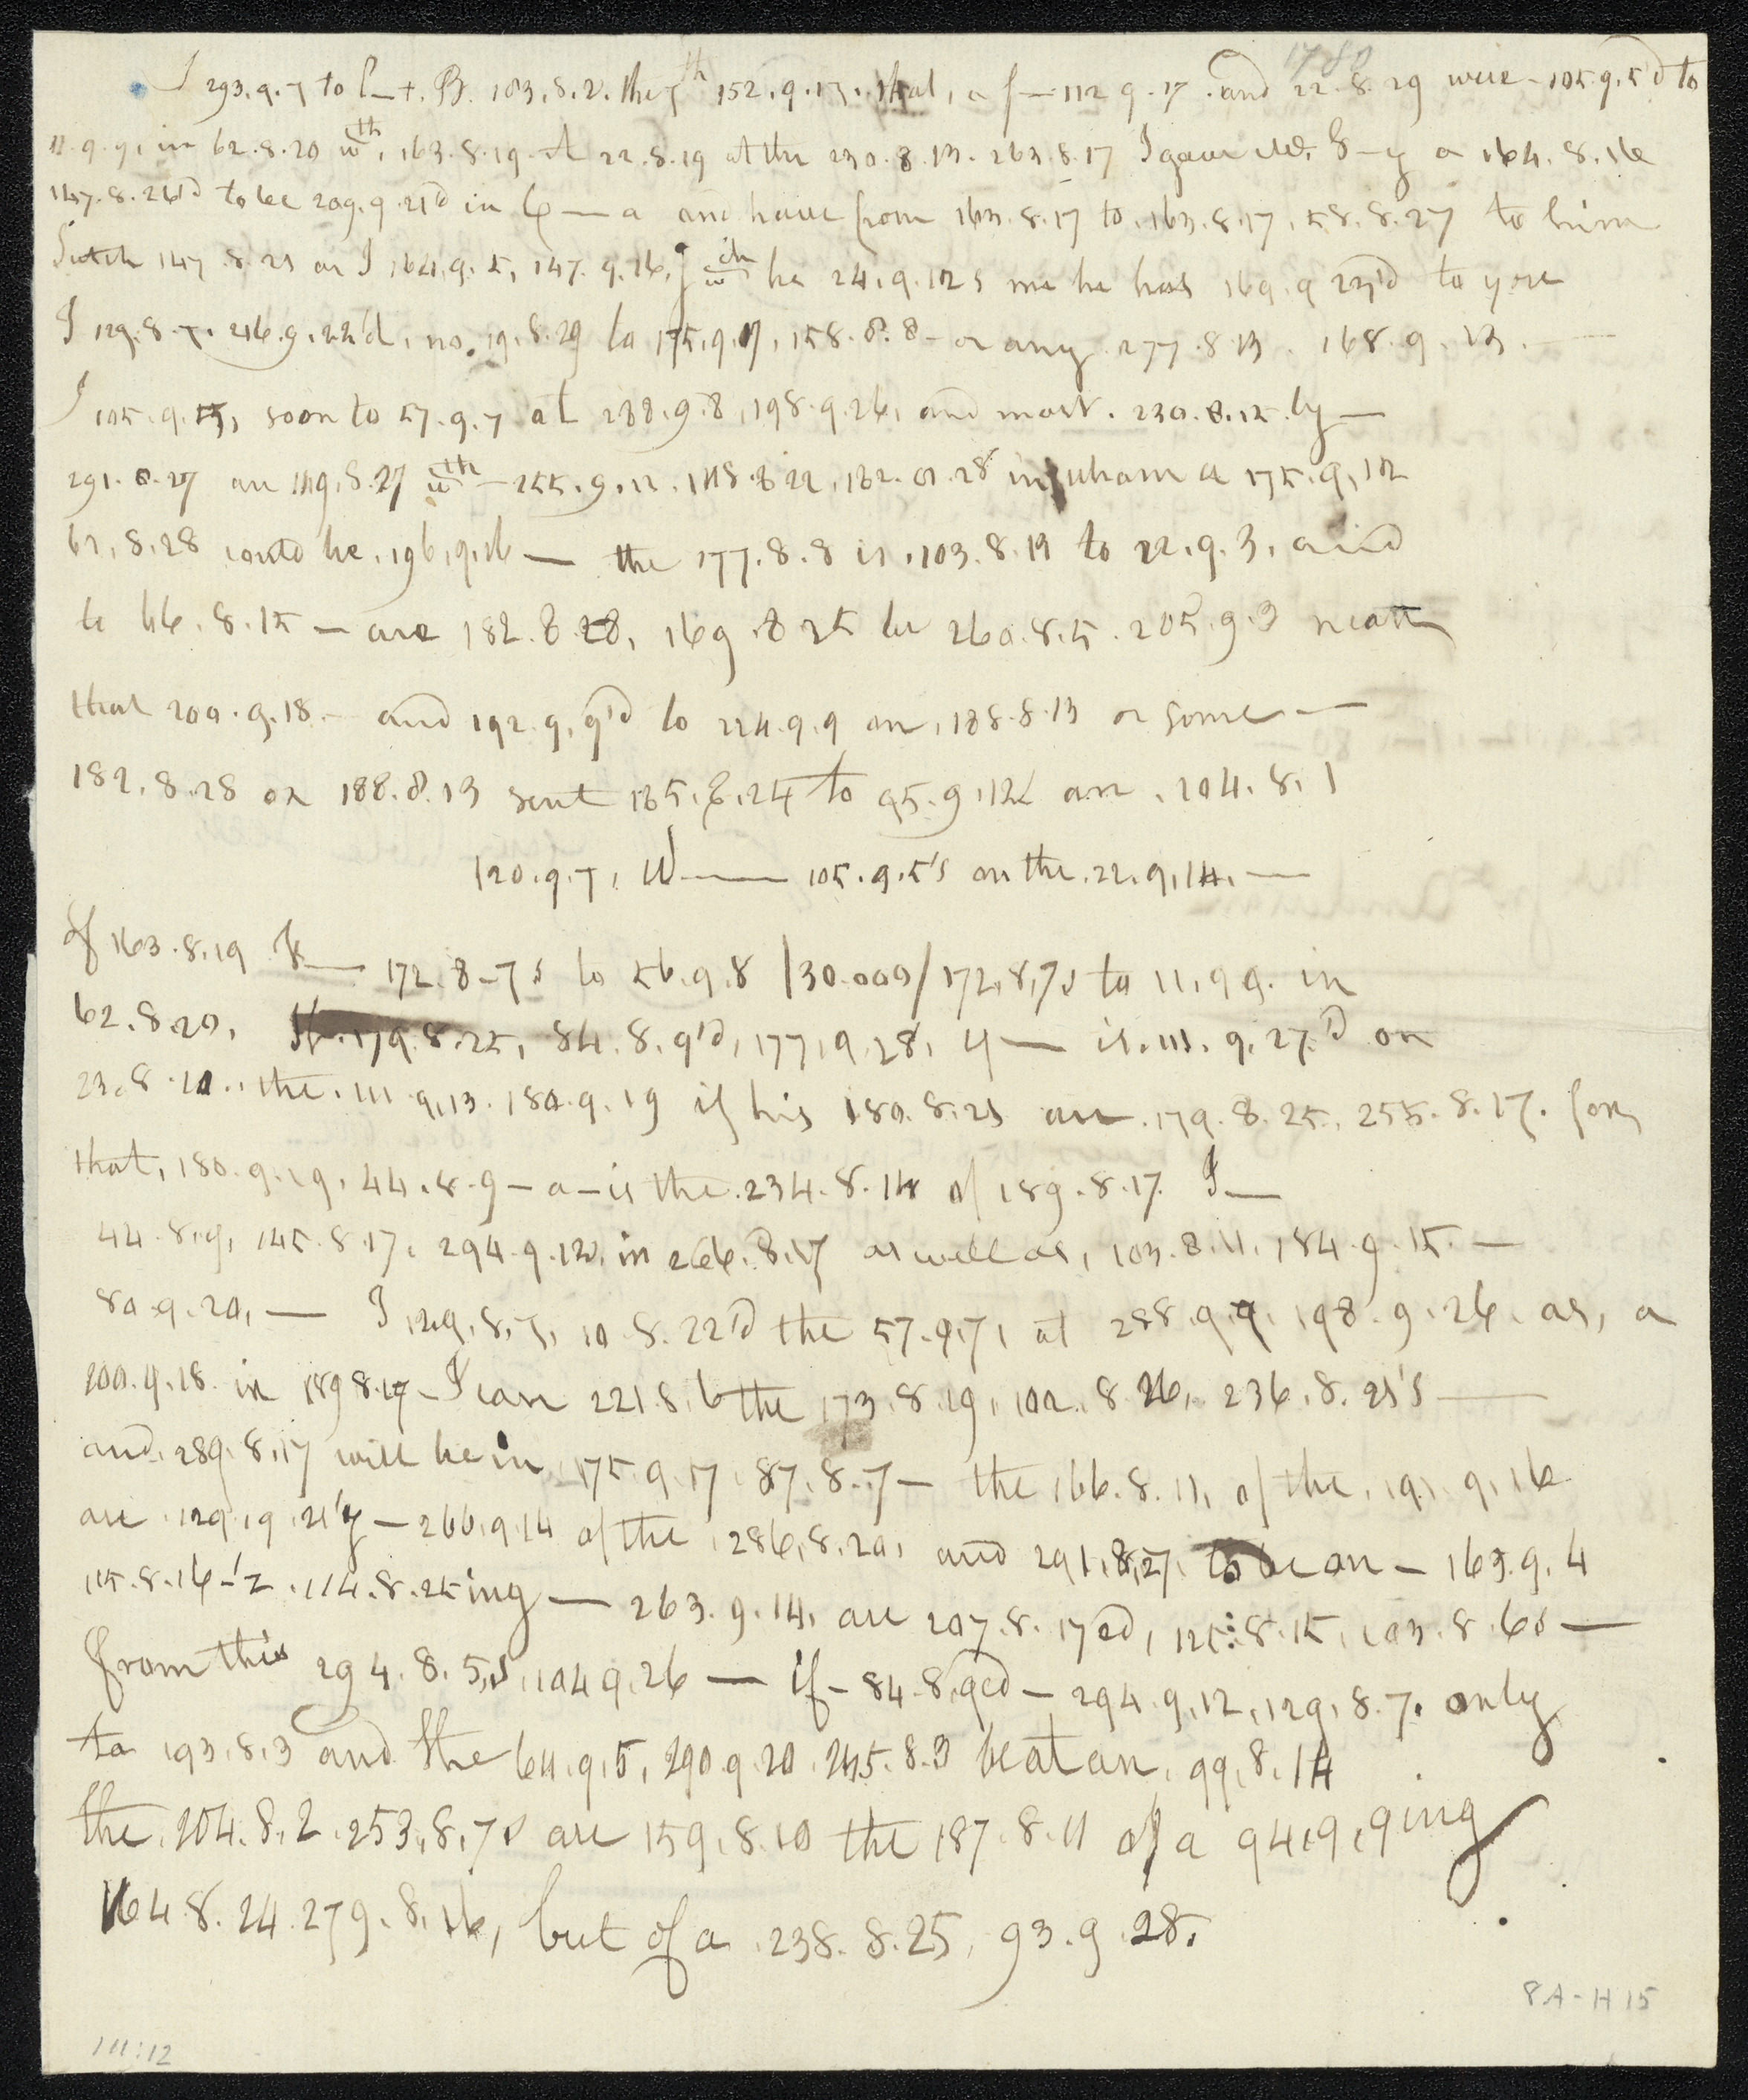 Coded and decoded versions of a letter from Benedict Arnold to John André